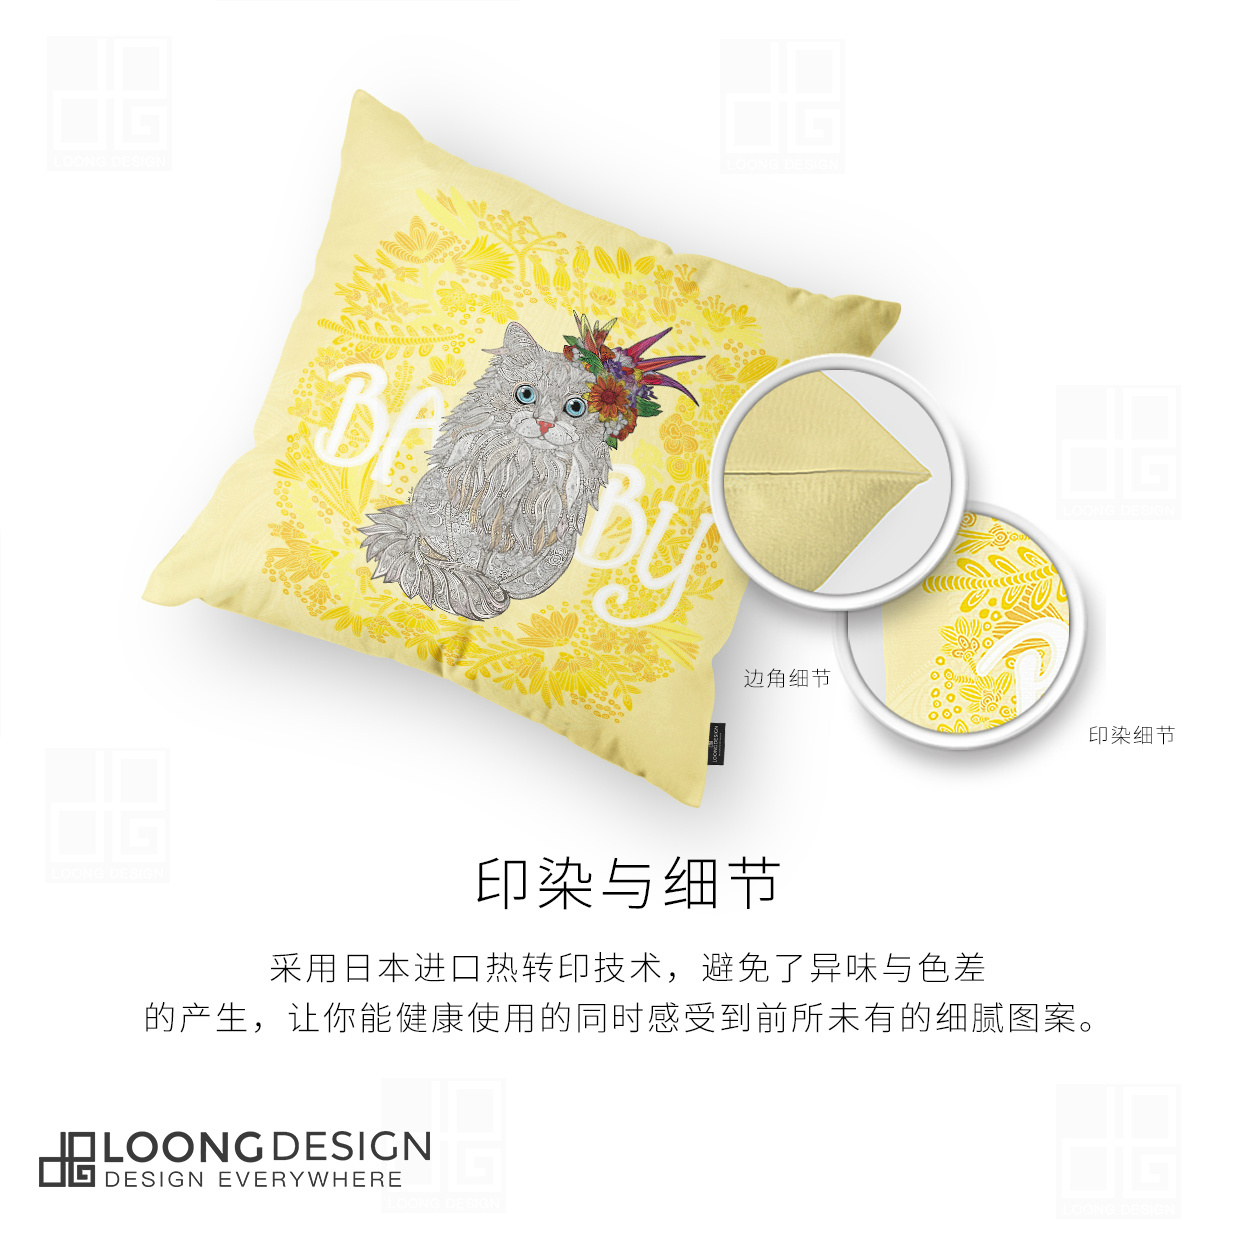 Loong Design￿Simon wong